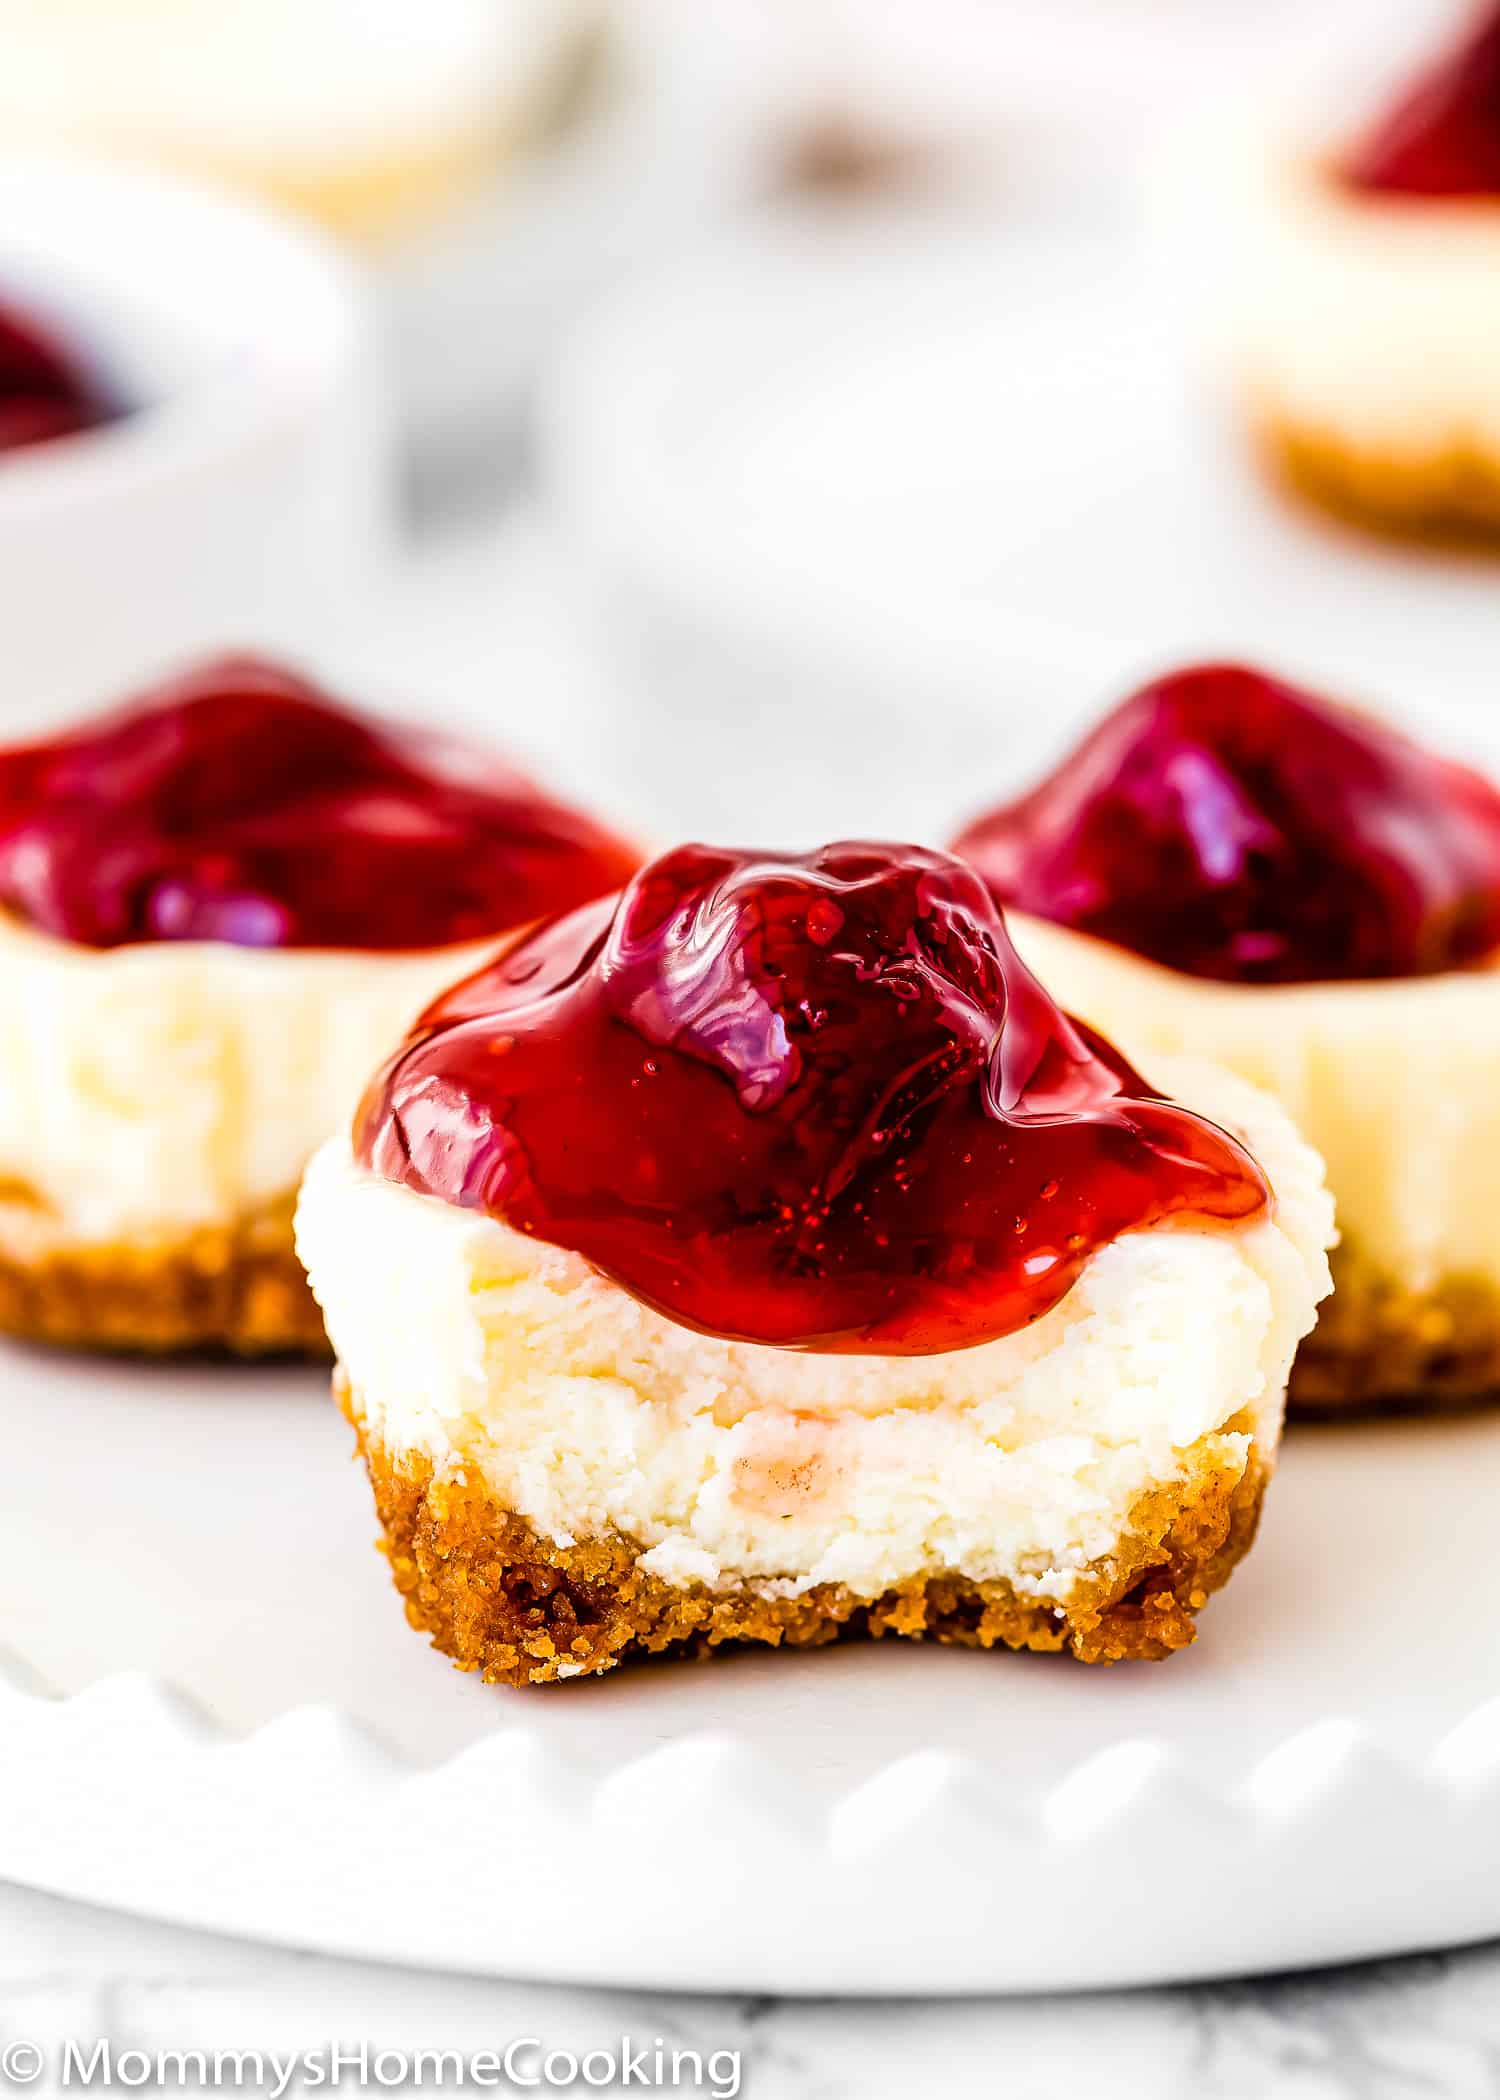 A bitten egg-free strawberry mini cheesecake on a plate showing its creamy texture.